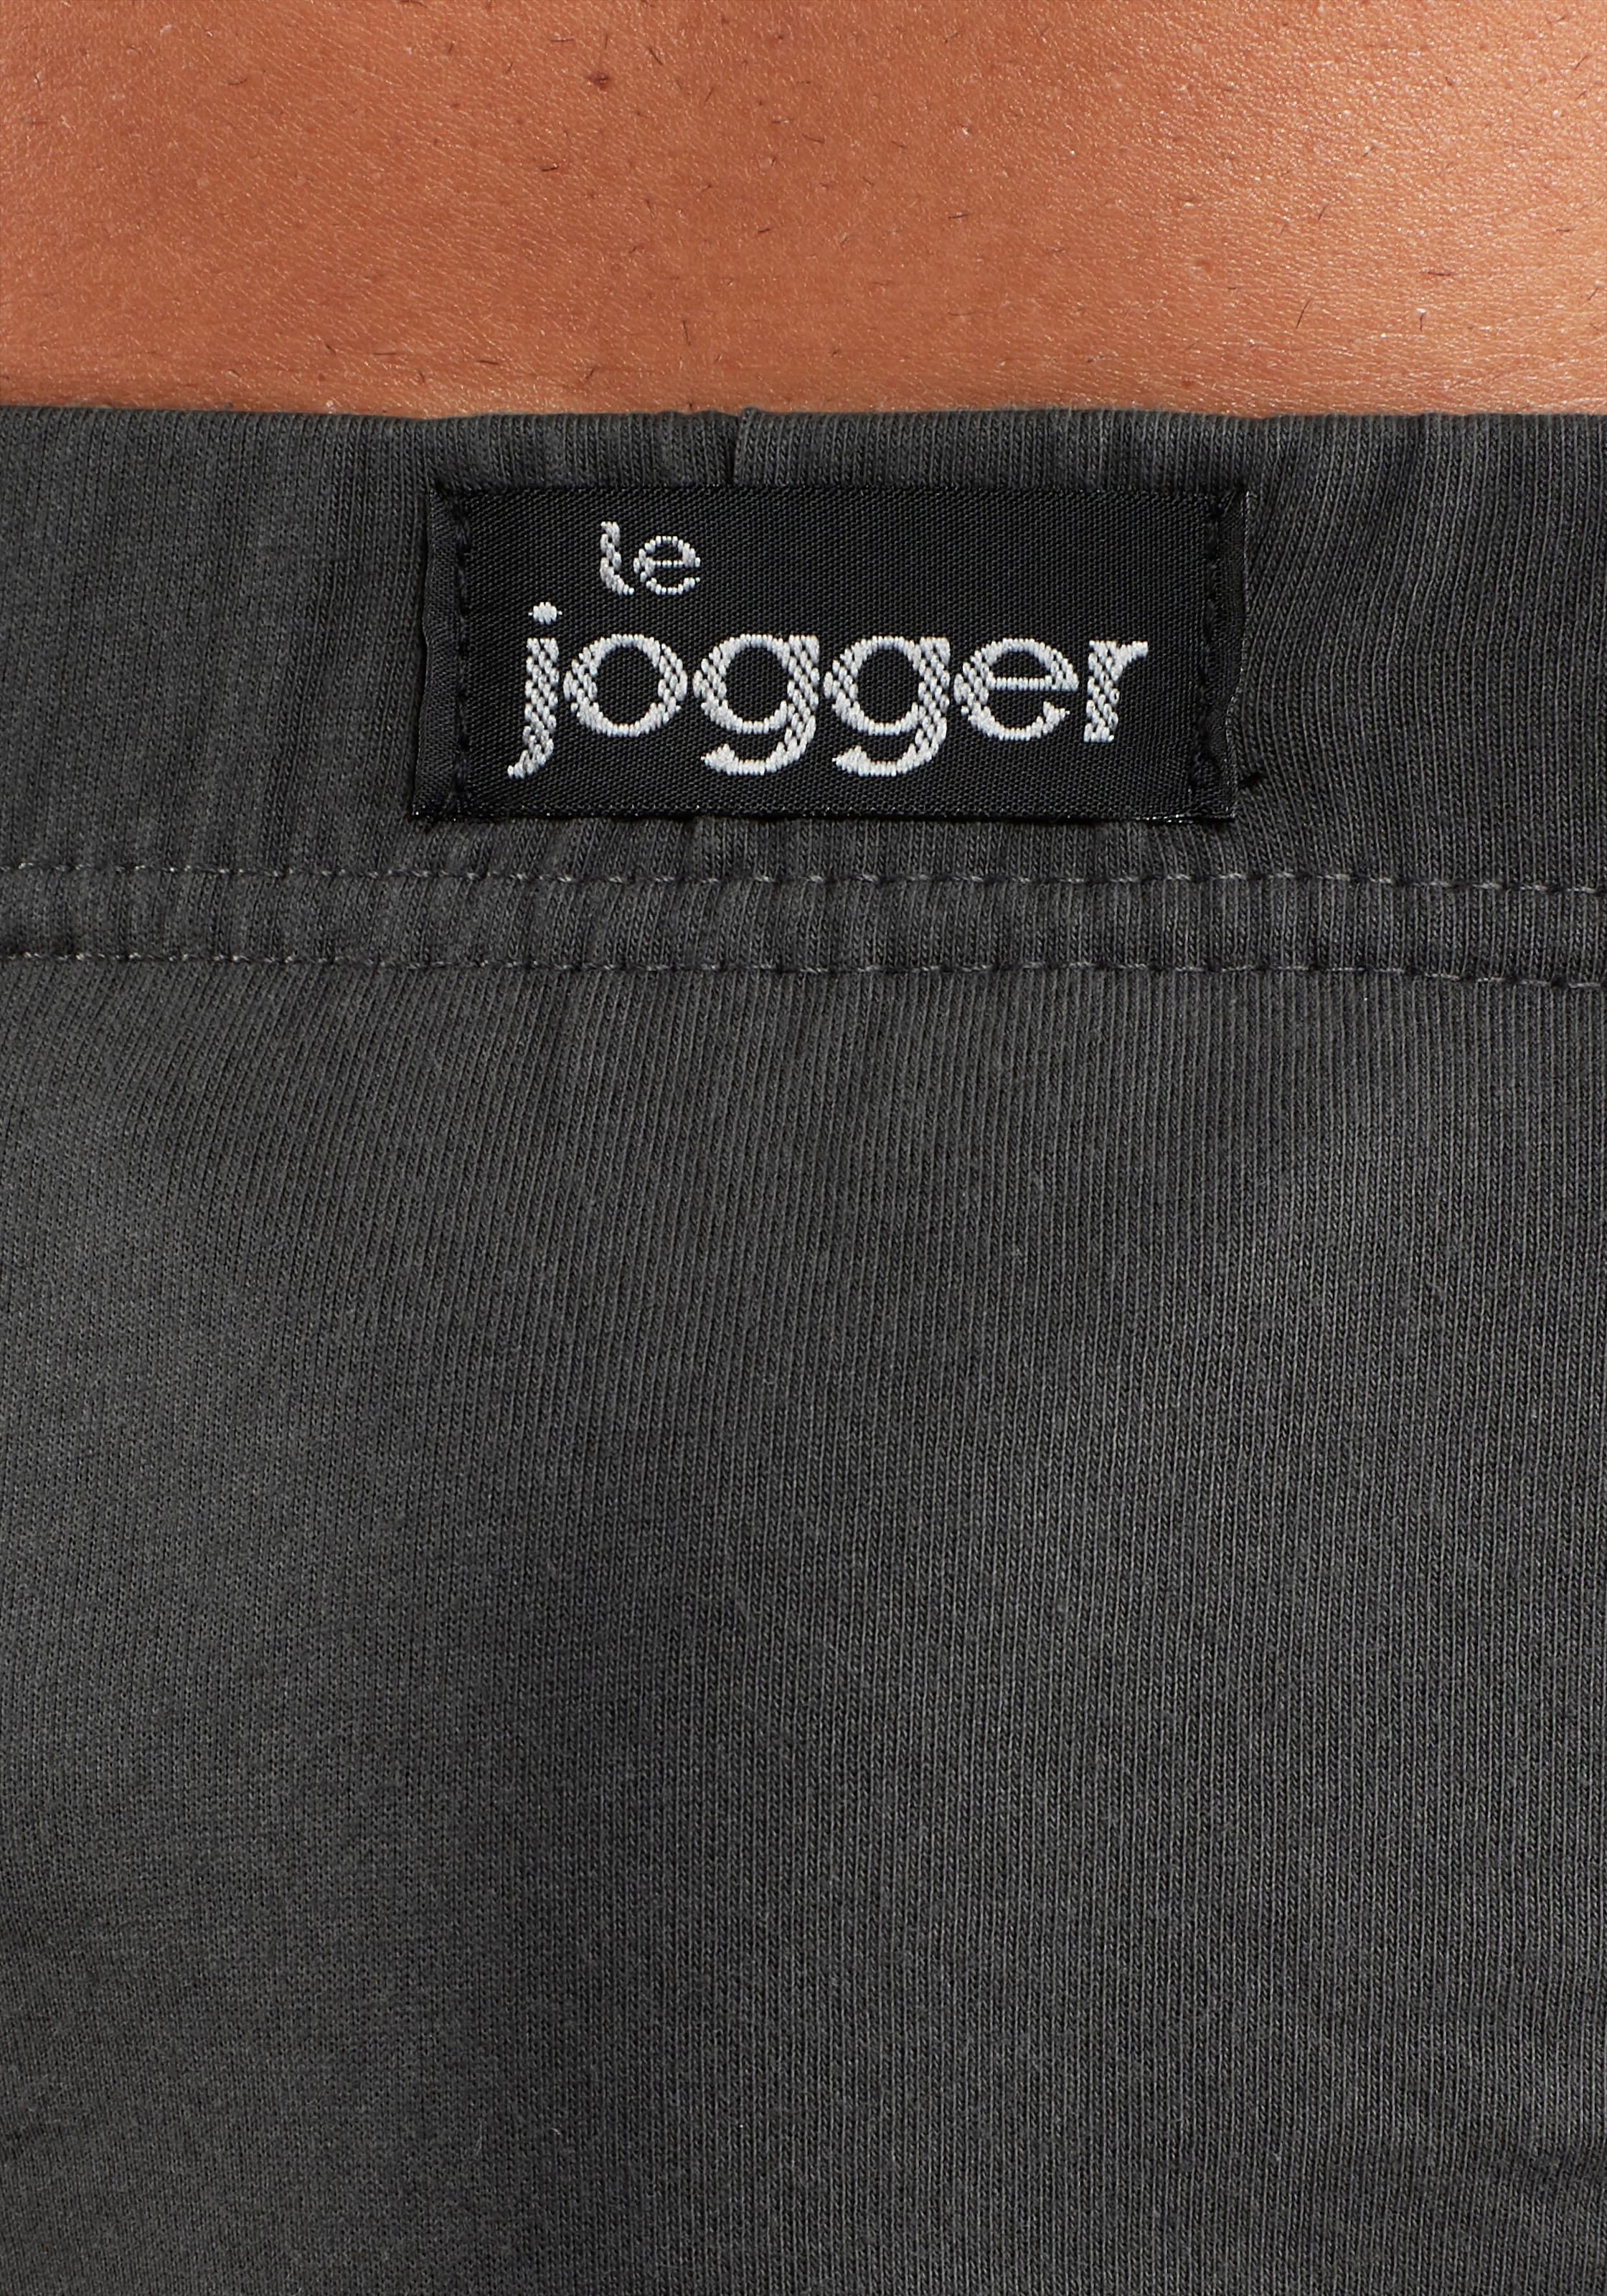 le jogger® Slip, (Packung, 12 St.), mit Farbhighlights